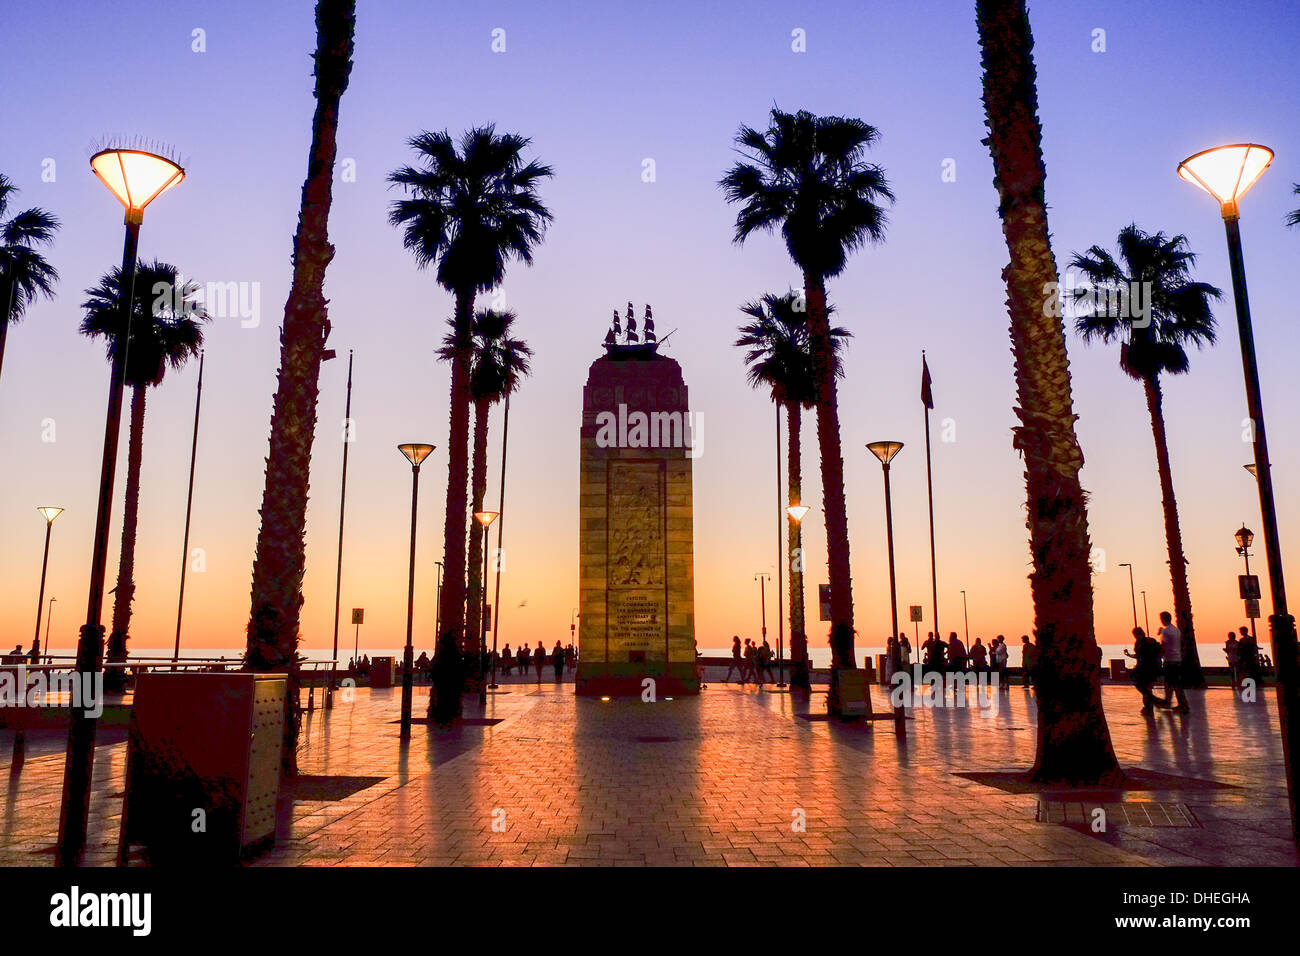 The monument and palms of Glenelg's Moseley Square in Adelaide silhouetted against the sunset. Stock Photo